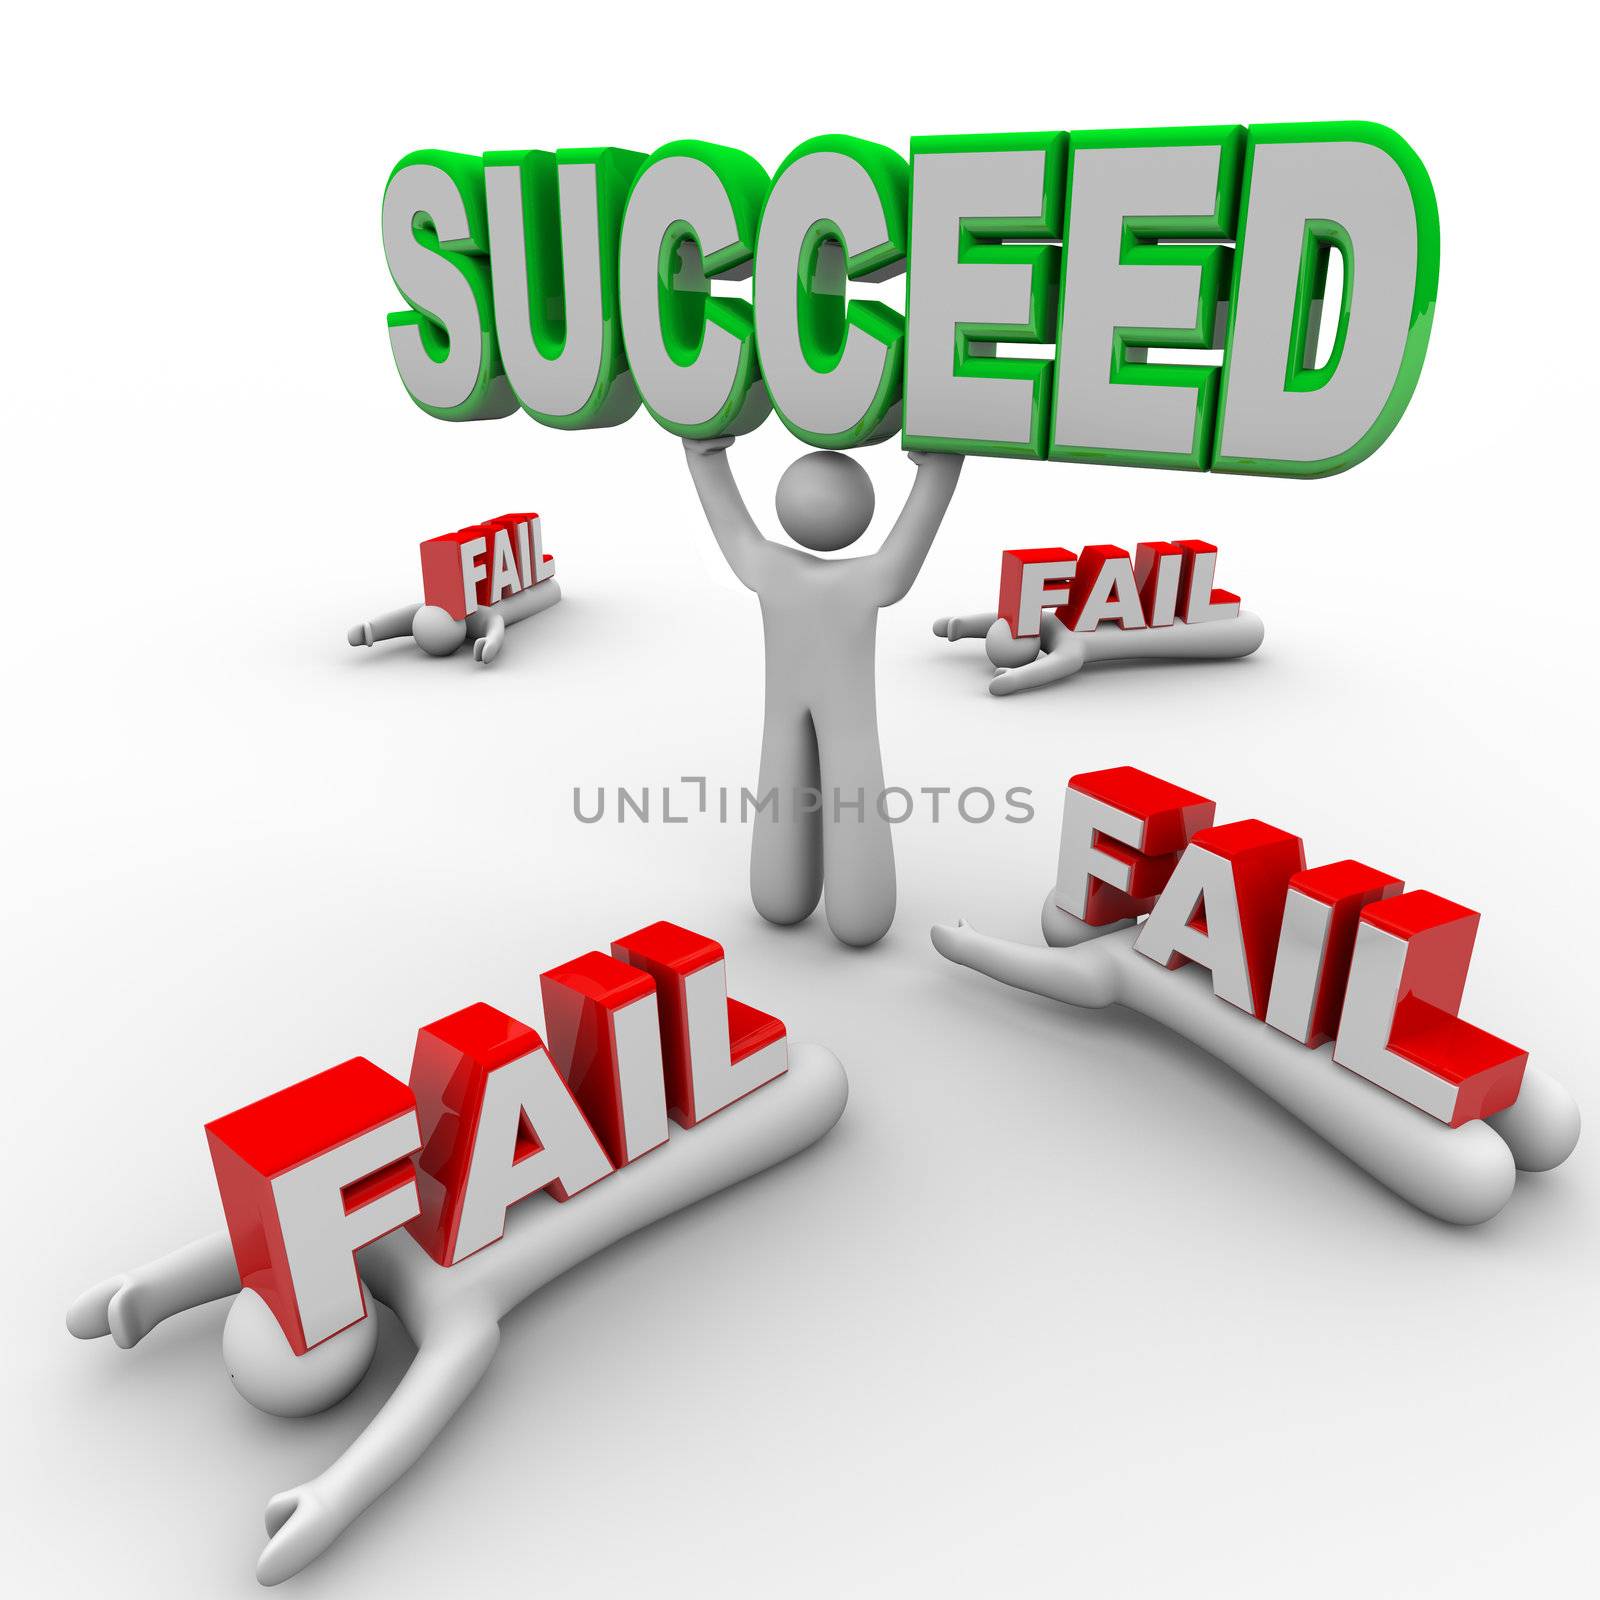 One person succeeds and holds the word Succeed while others lay crushed under the word Fail, symbolizing how a successful person wins in life and competitors may lose